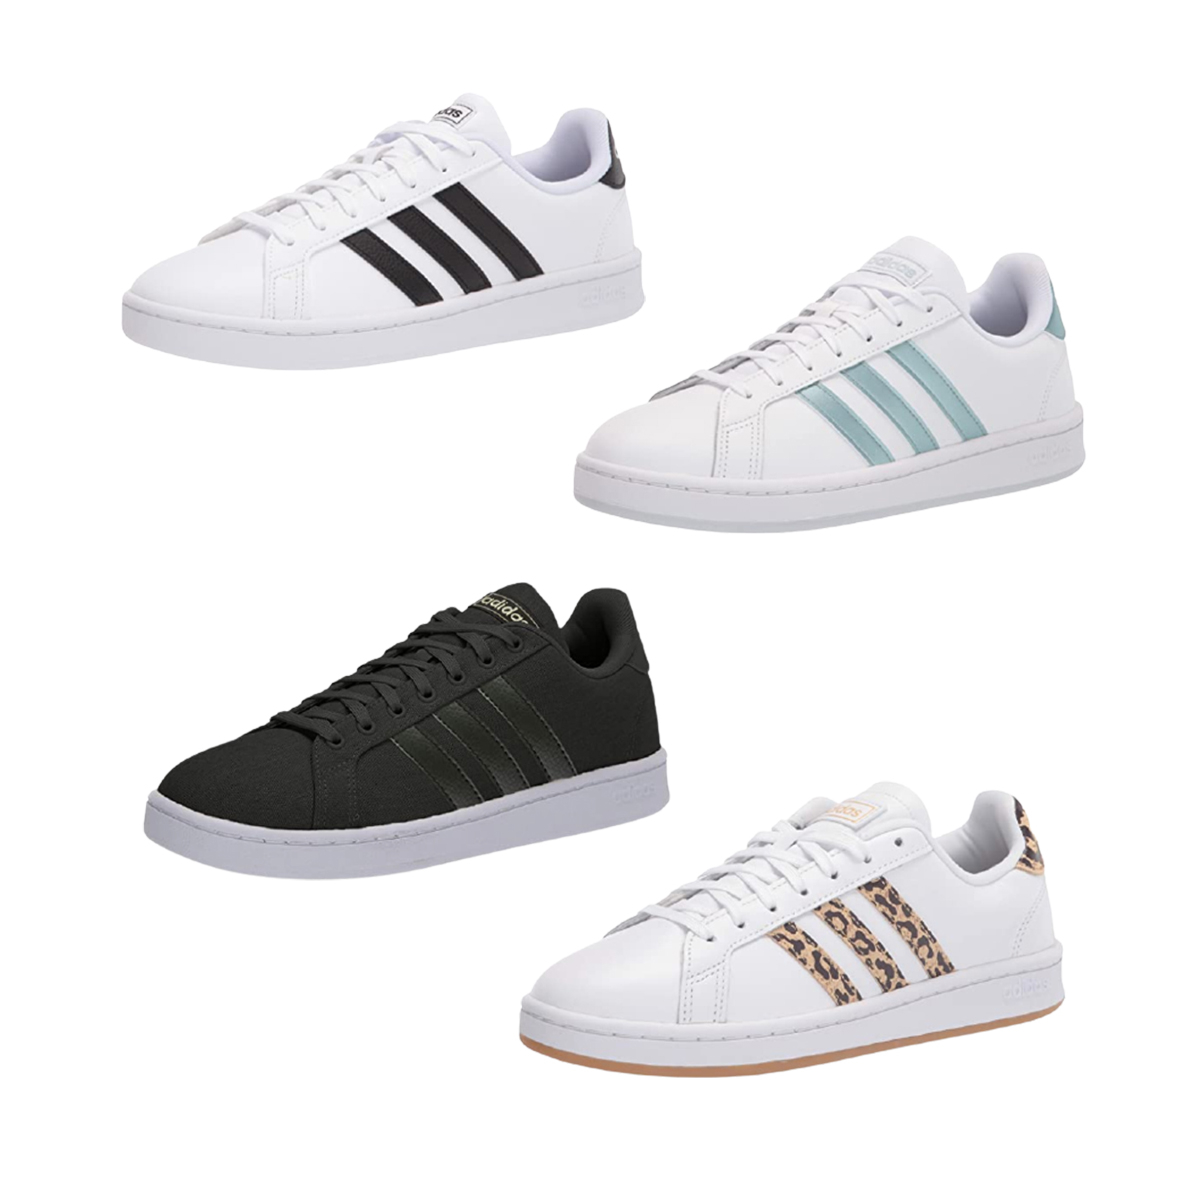 Bestselling Adidas Sneakers for $37? Shop This Amazon Sale - E! Online